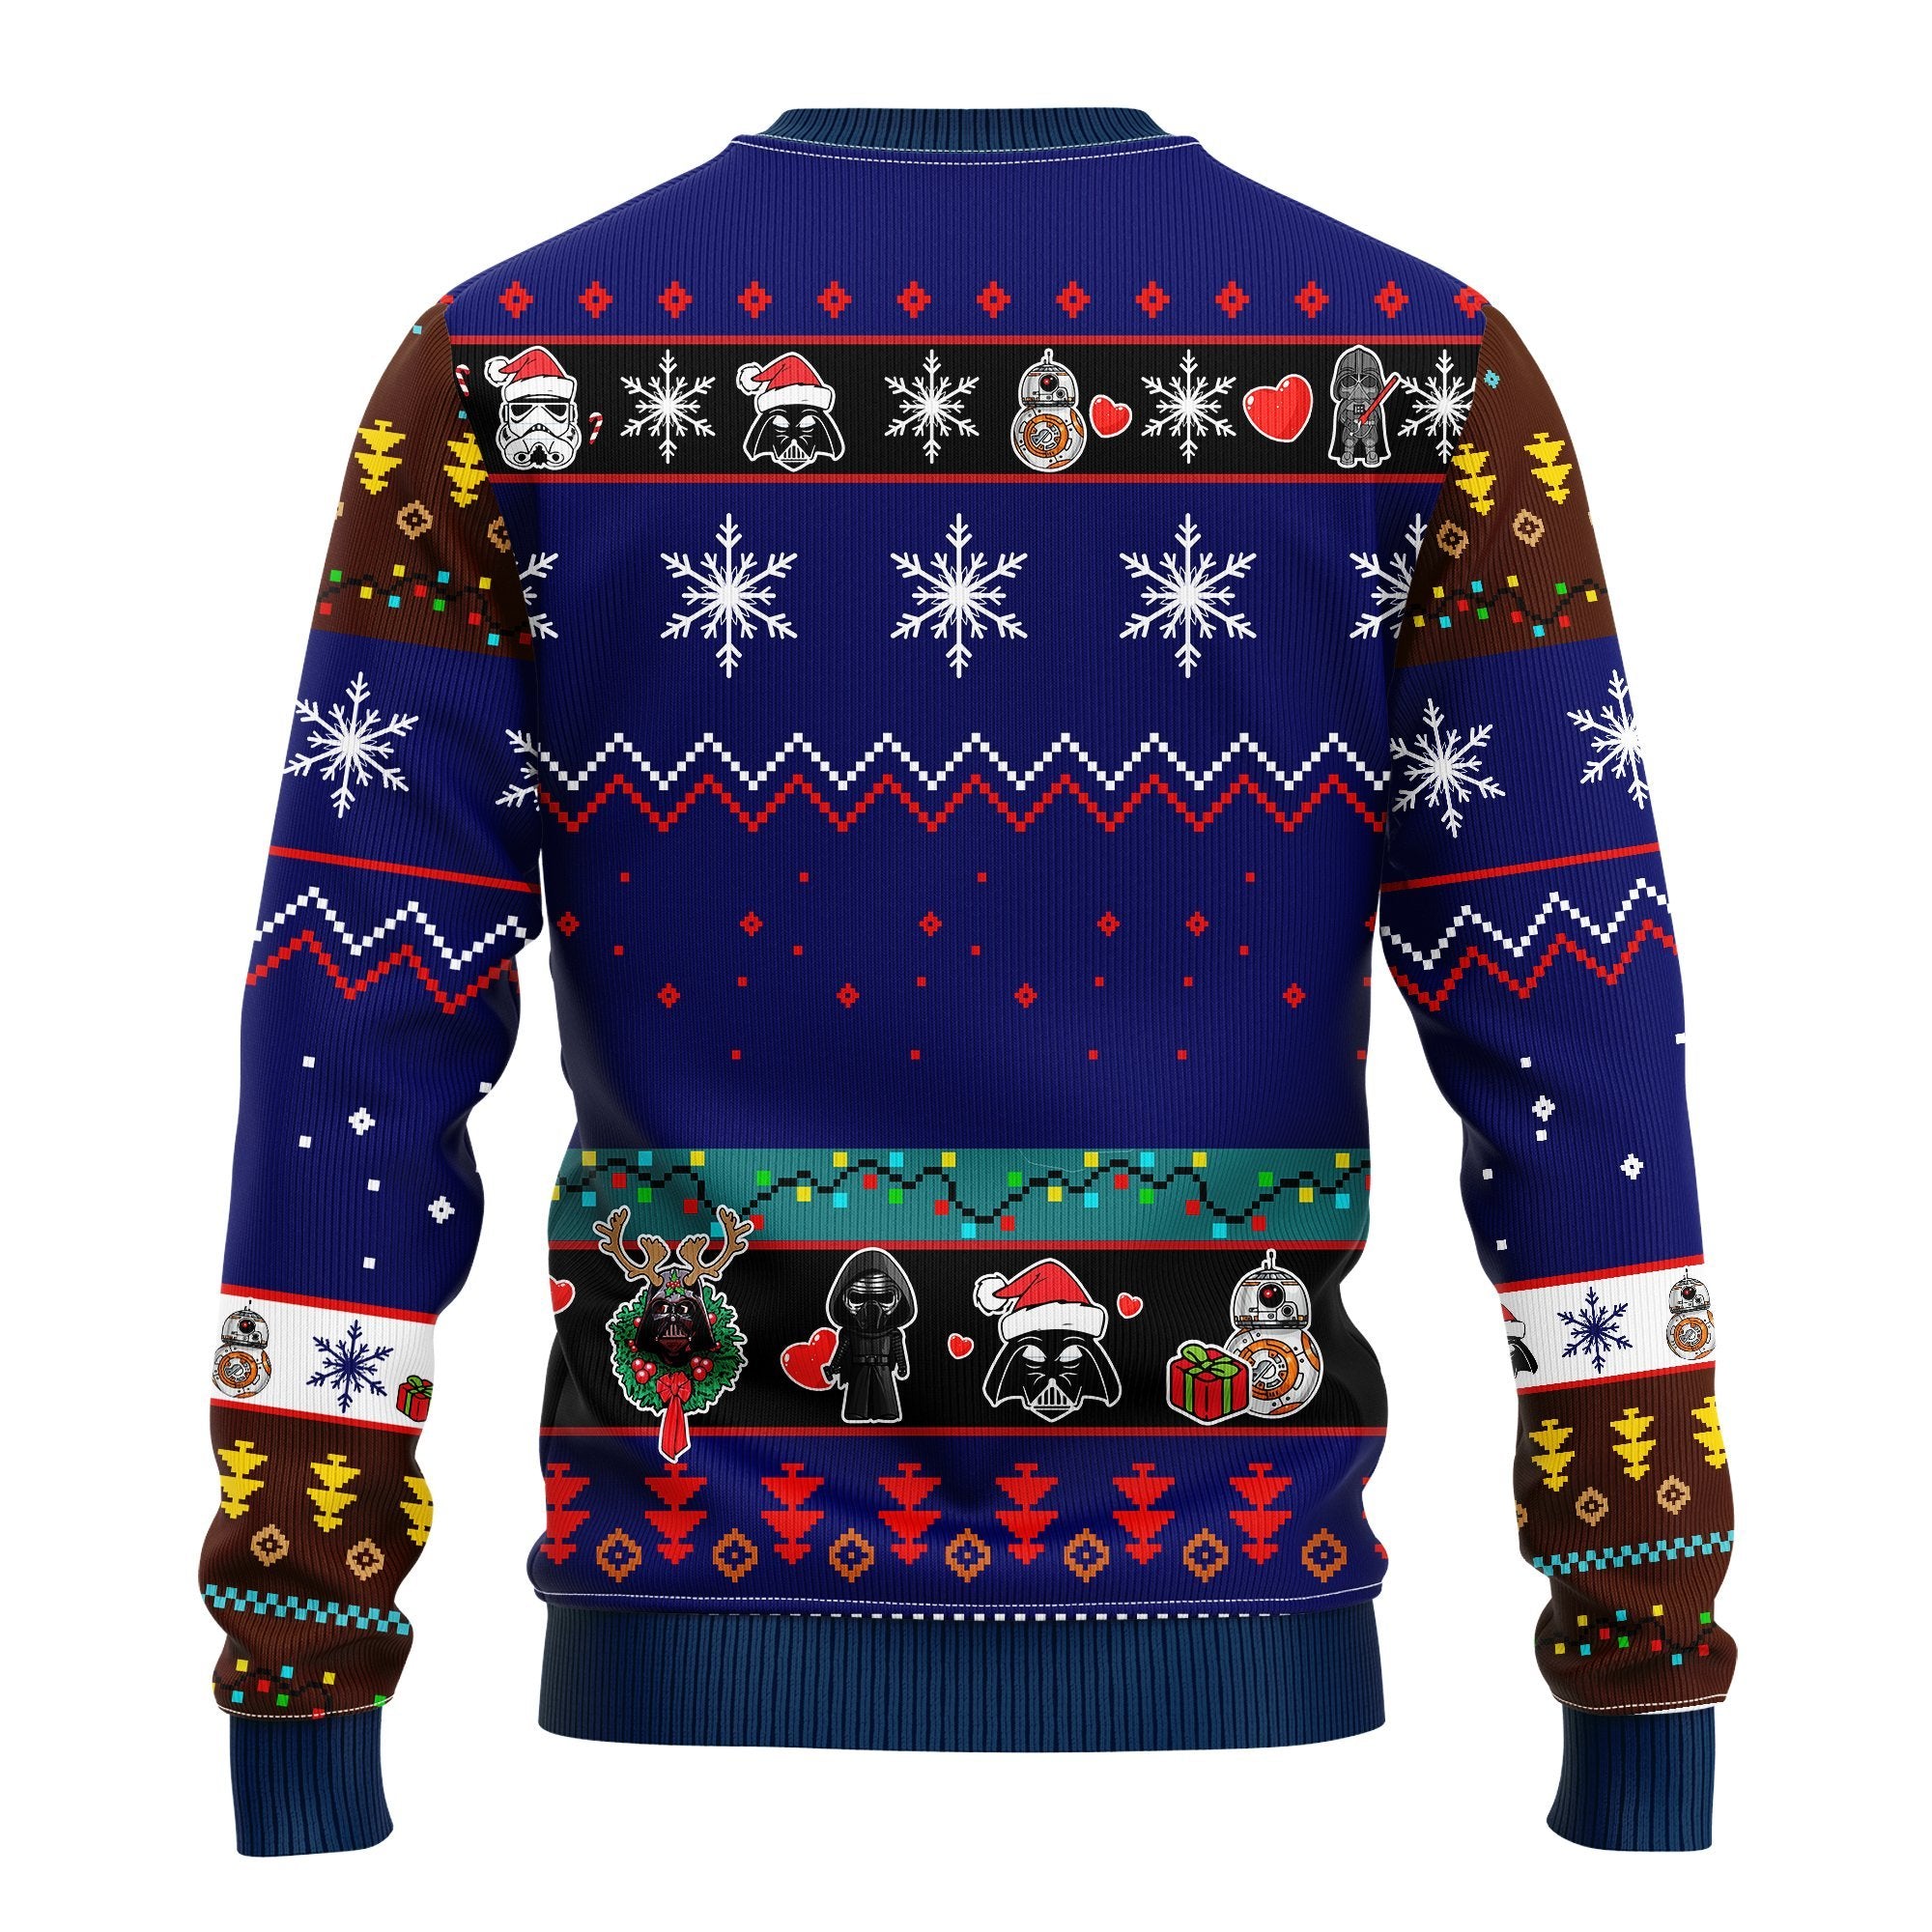 Darth Vader Ugly Christmas Sweater Blue 1 Amazing Gift Idea Thanksgiving Gift